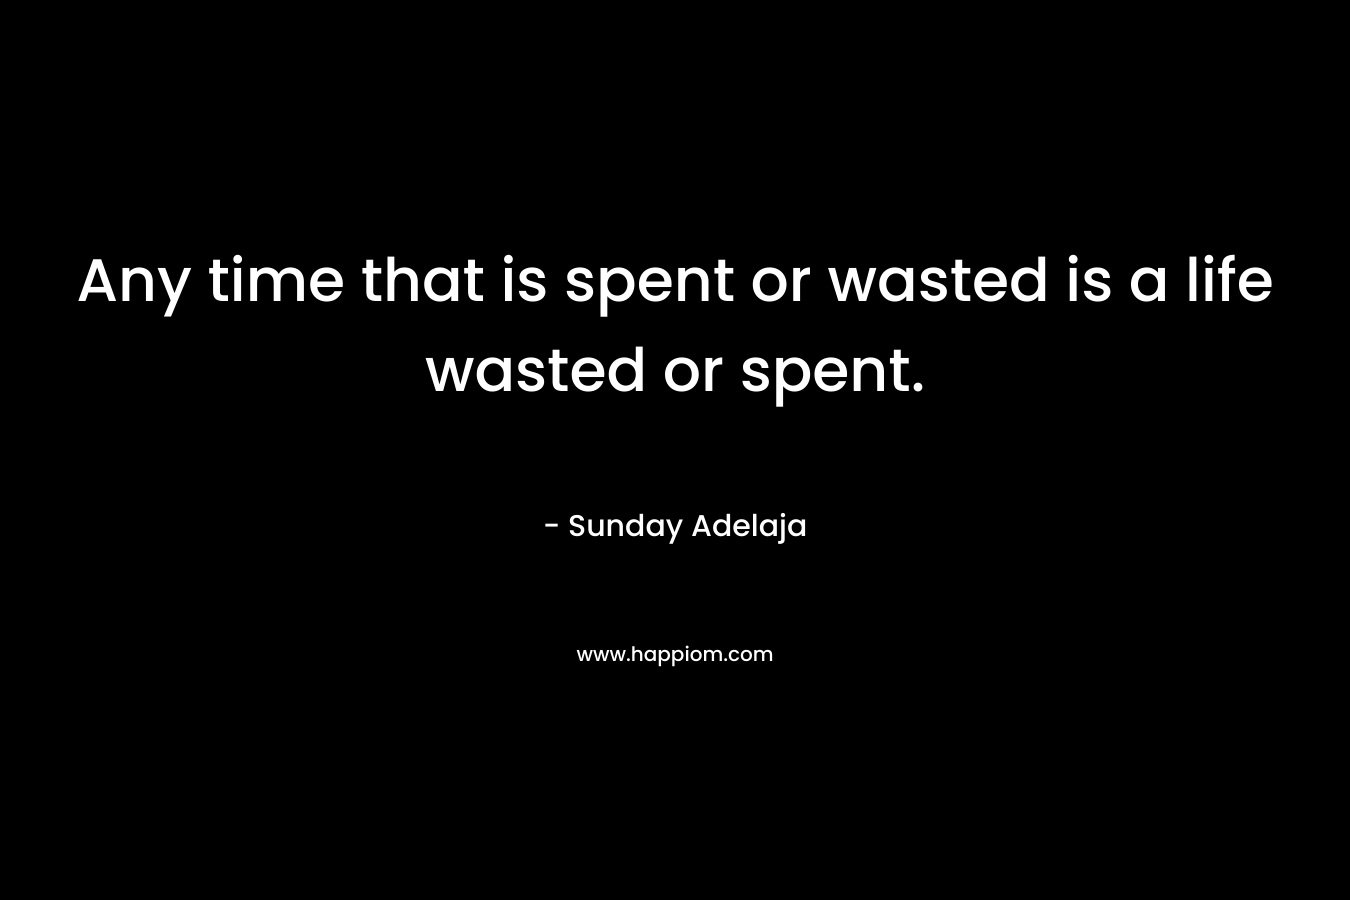 Any time that is spent or wasted is a life wasted or spent.